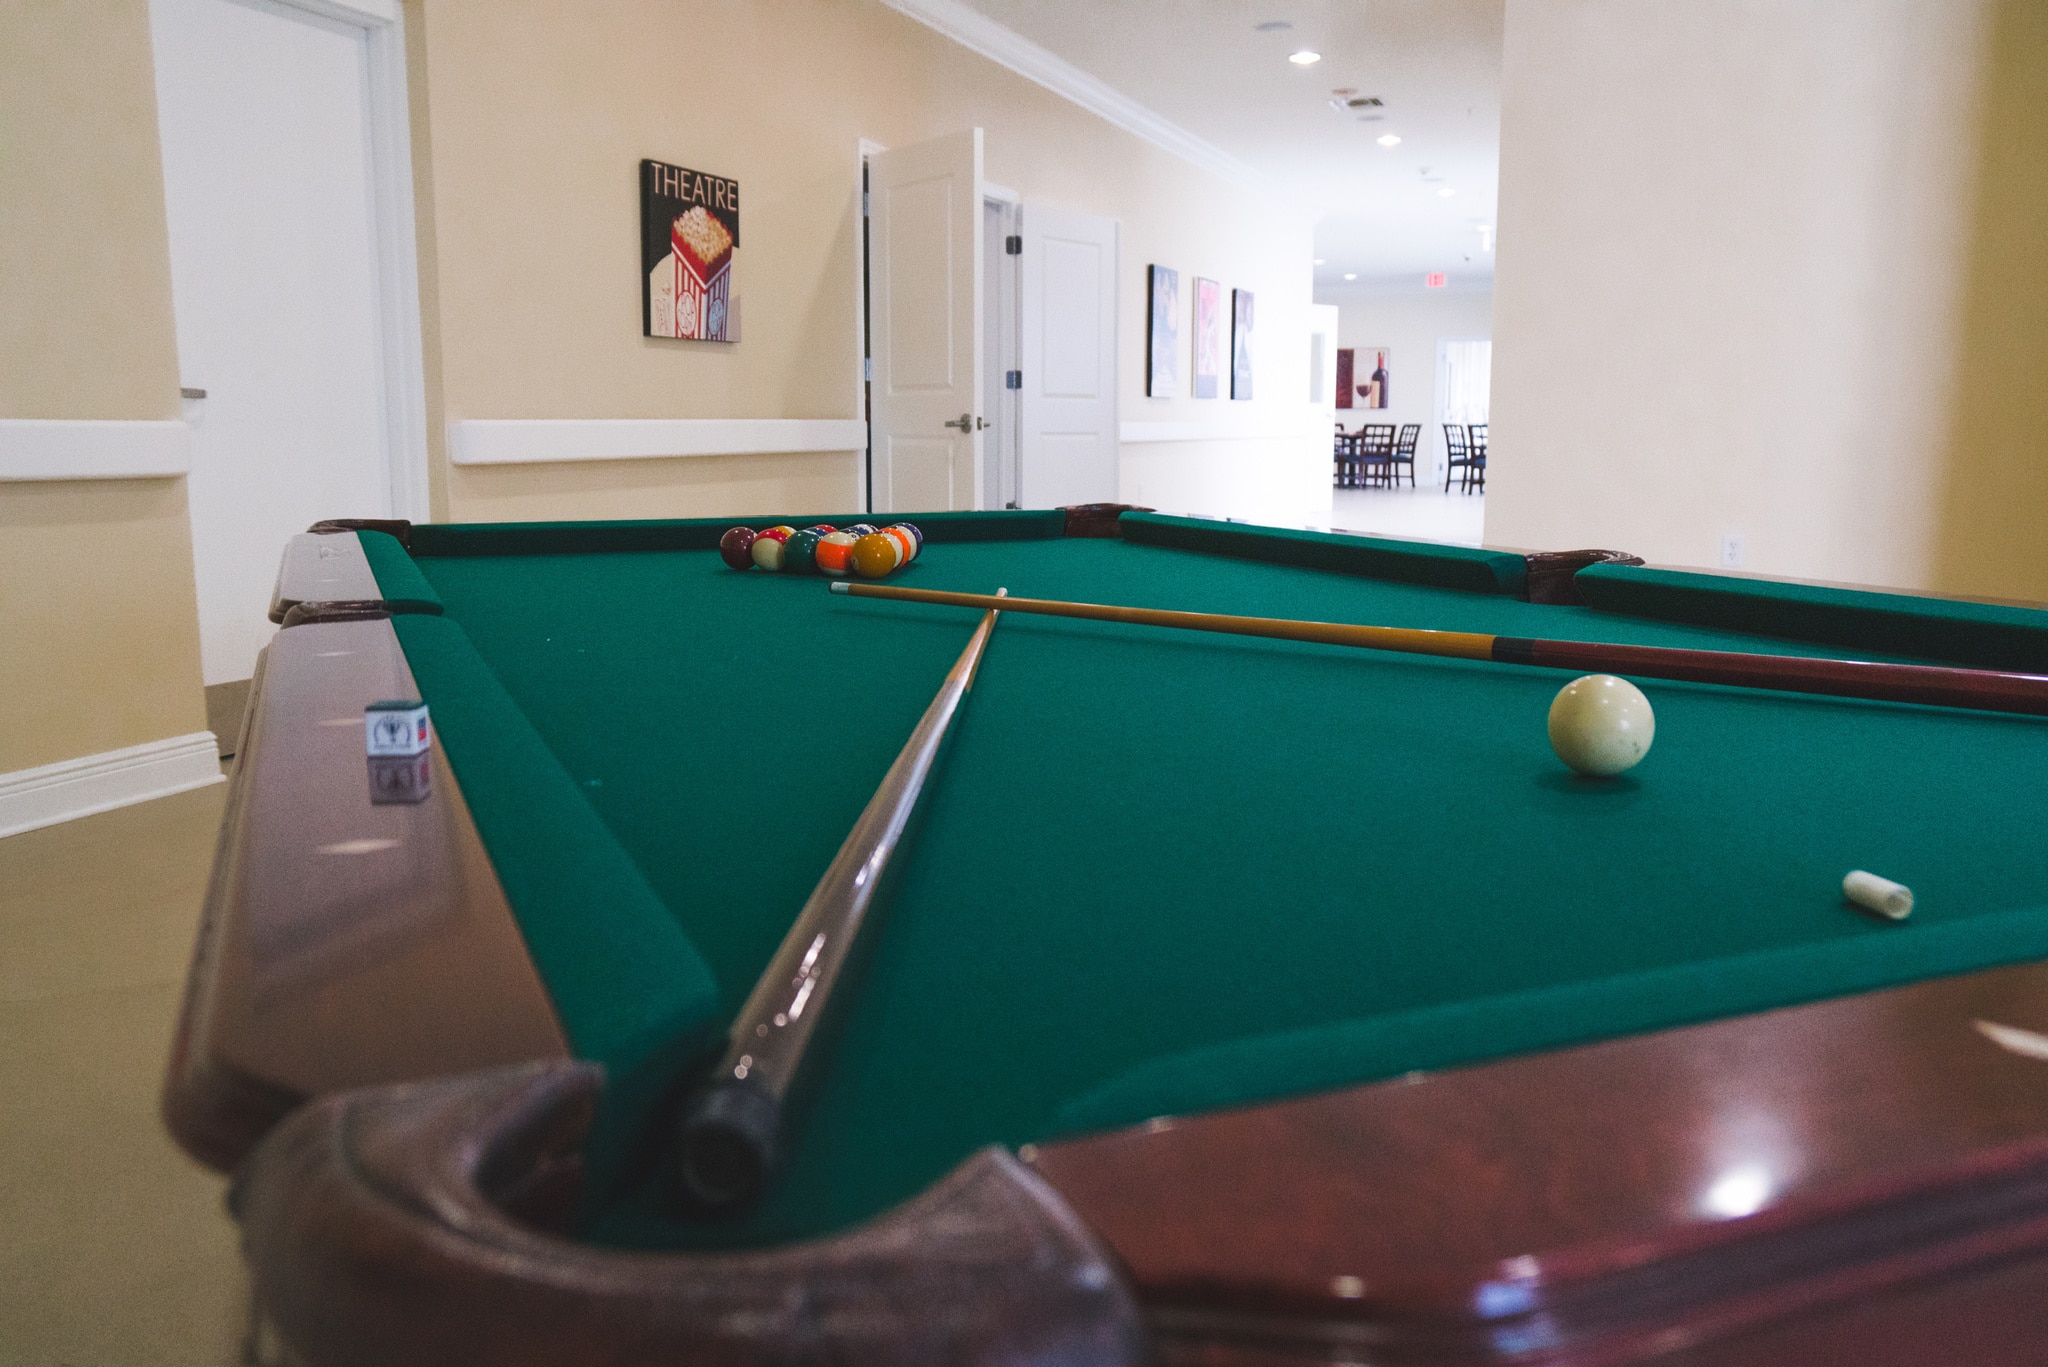 Angels Senior Living at Sarasota offers residents a pool table to indulge in a